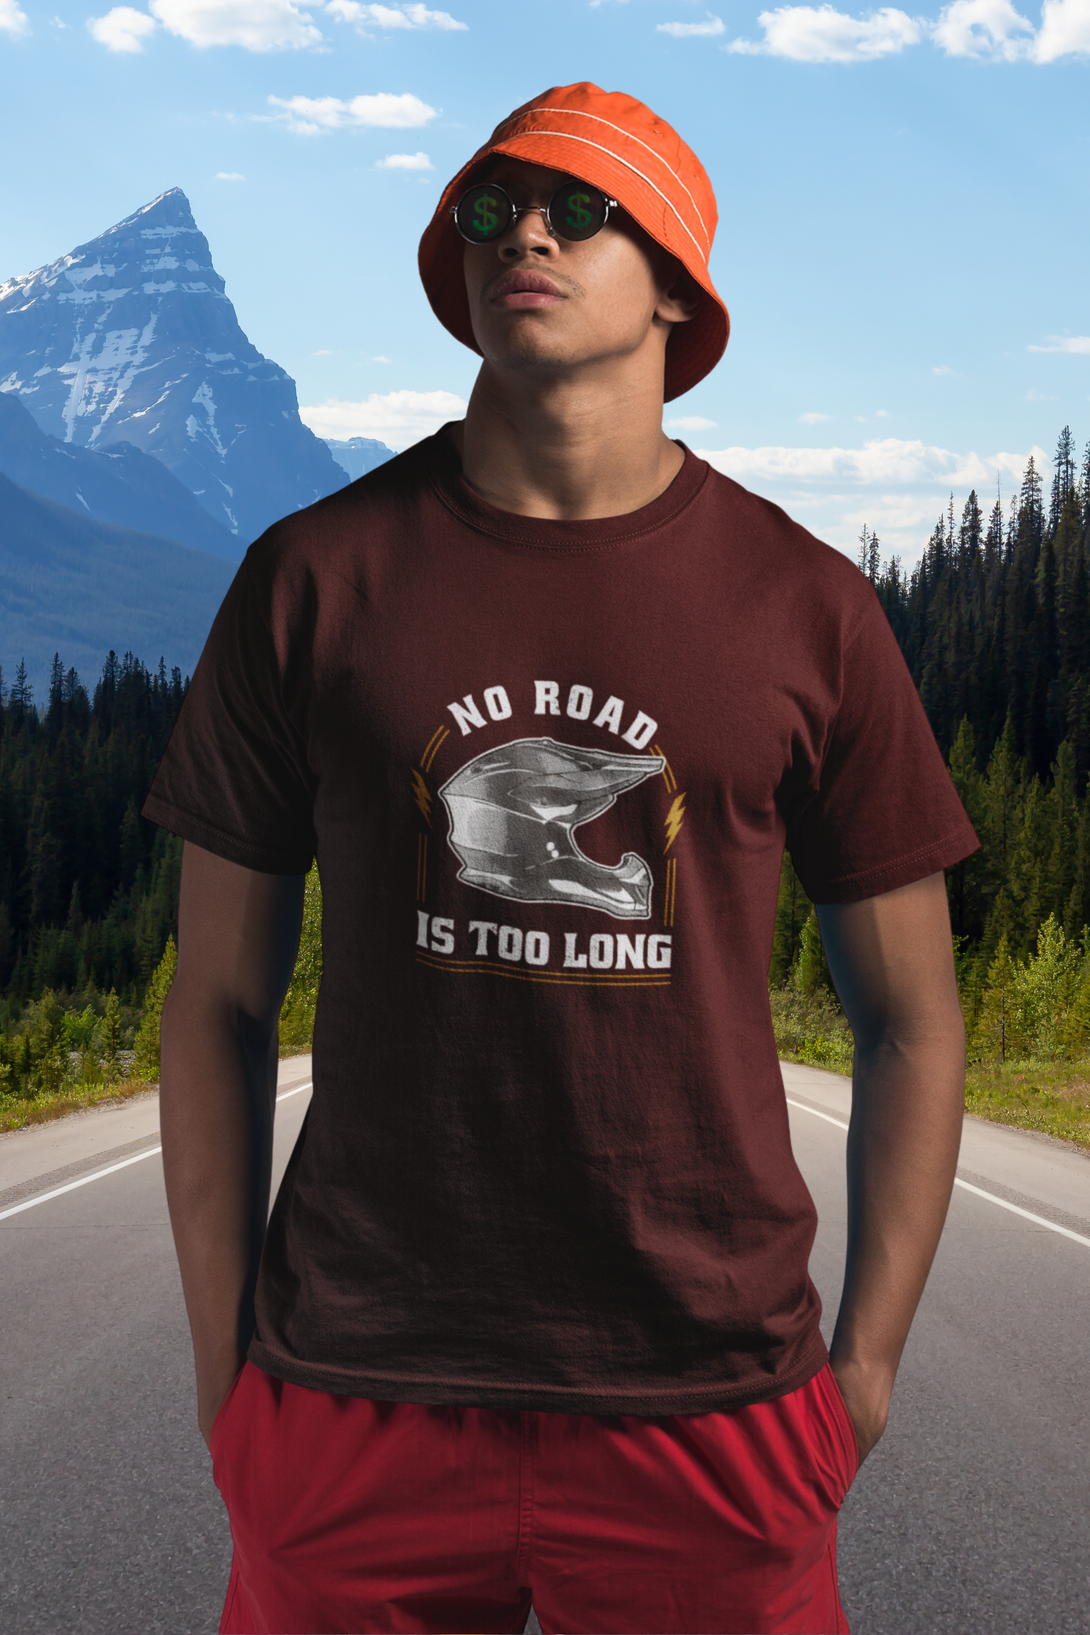 No Road Is Too Long Printed T-Shirt For Men - WowWaves - 13